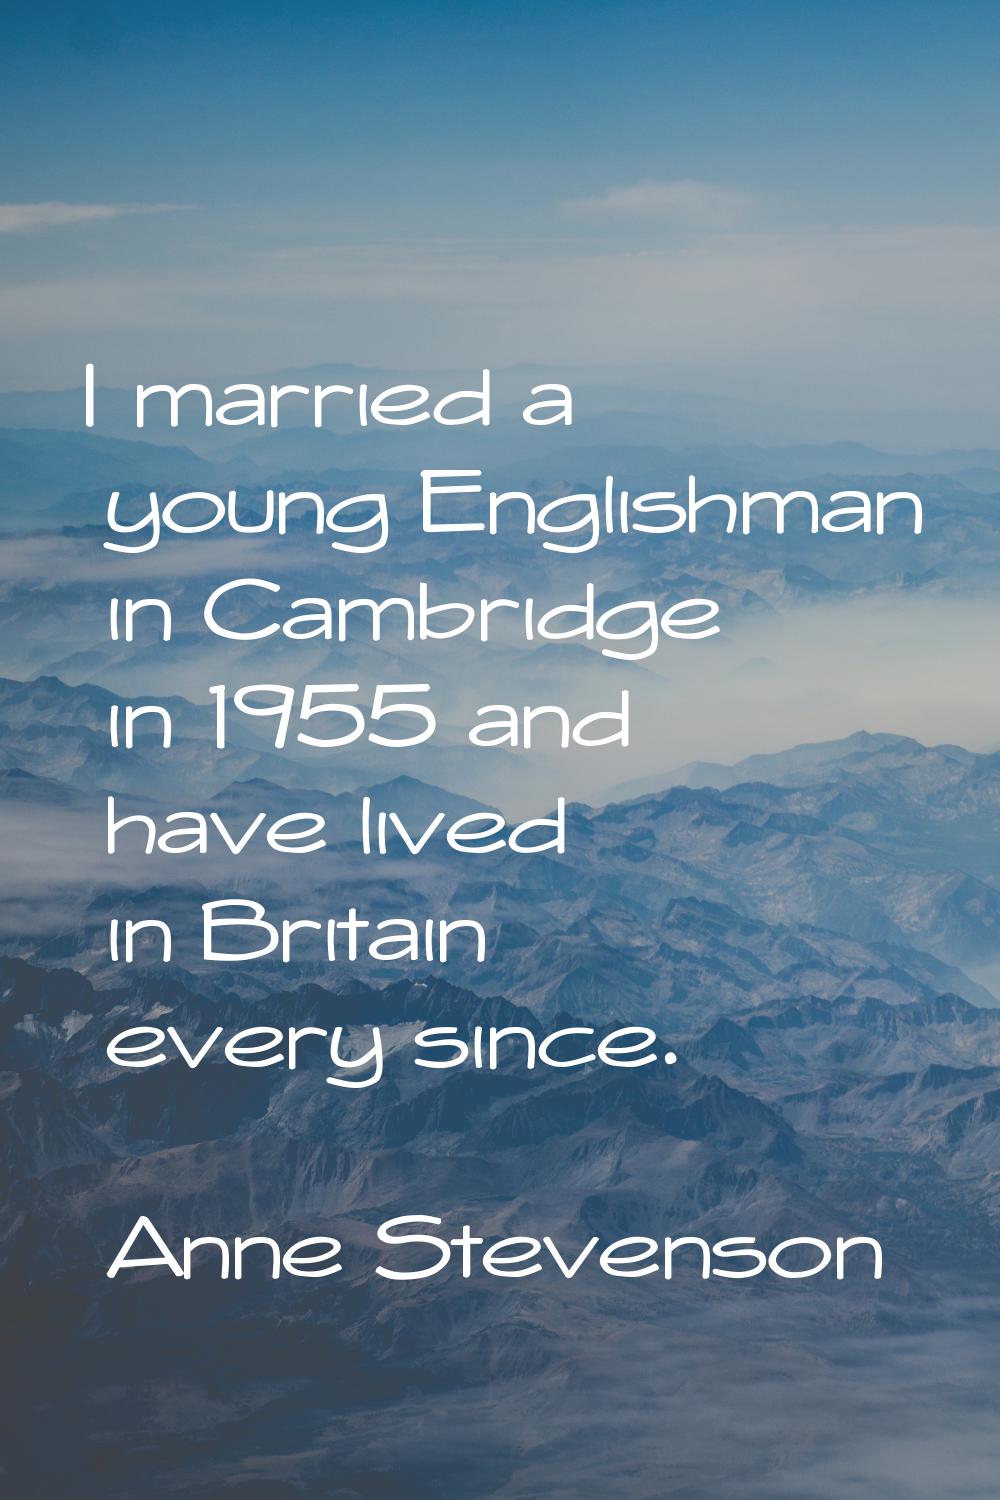 I married a young Englishman in Cambridge in 1955 and have lived in Britain every since.